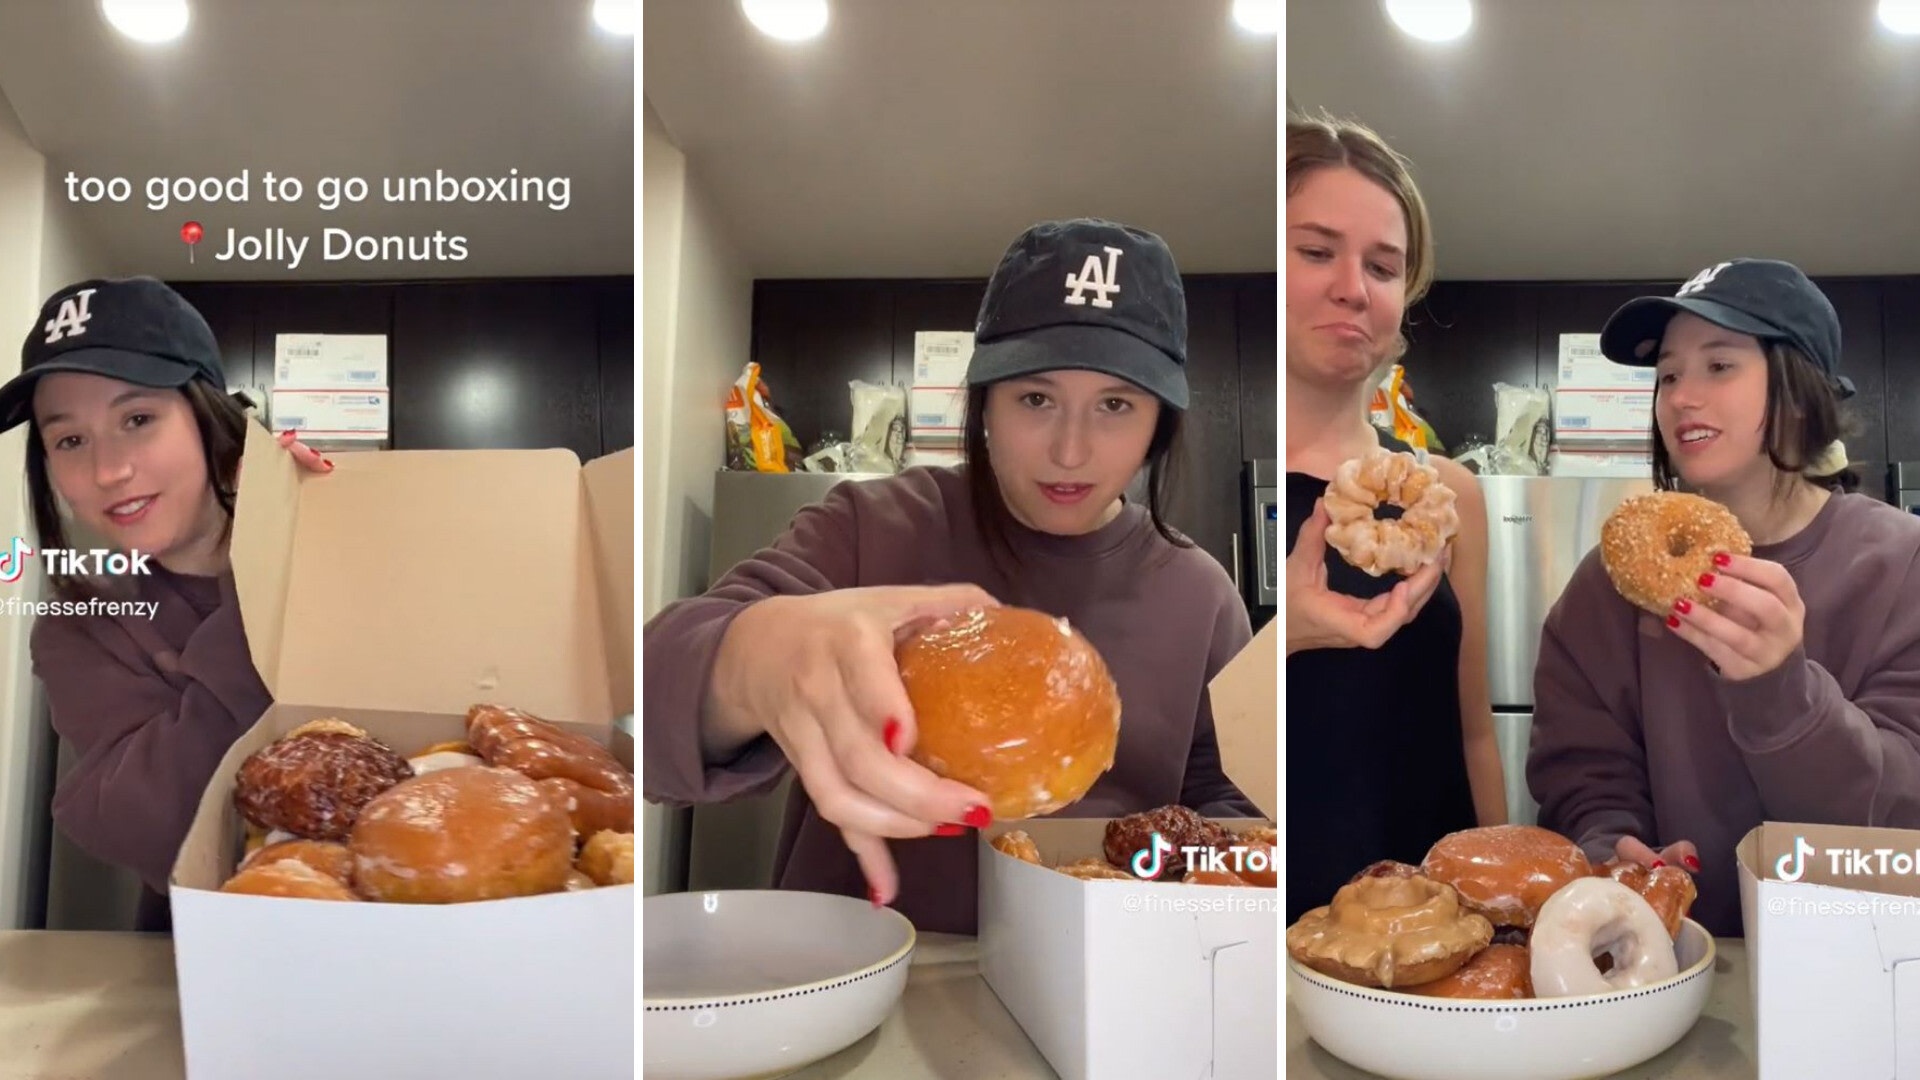 TikToker shows off huge box of donuts bought with Too Good To Go